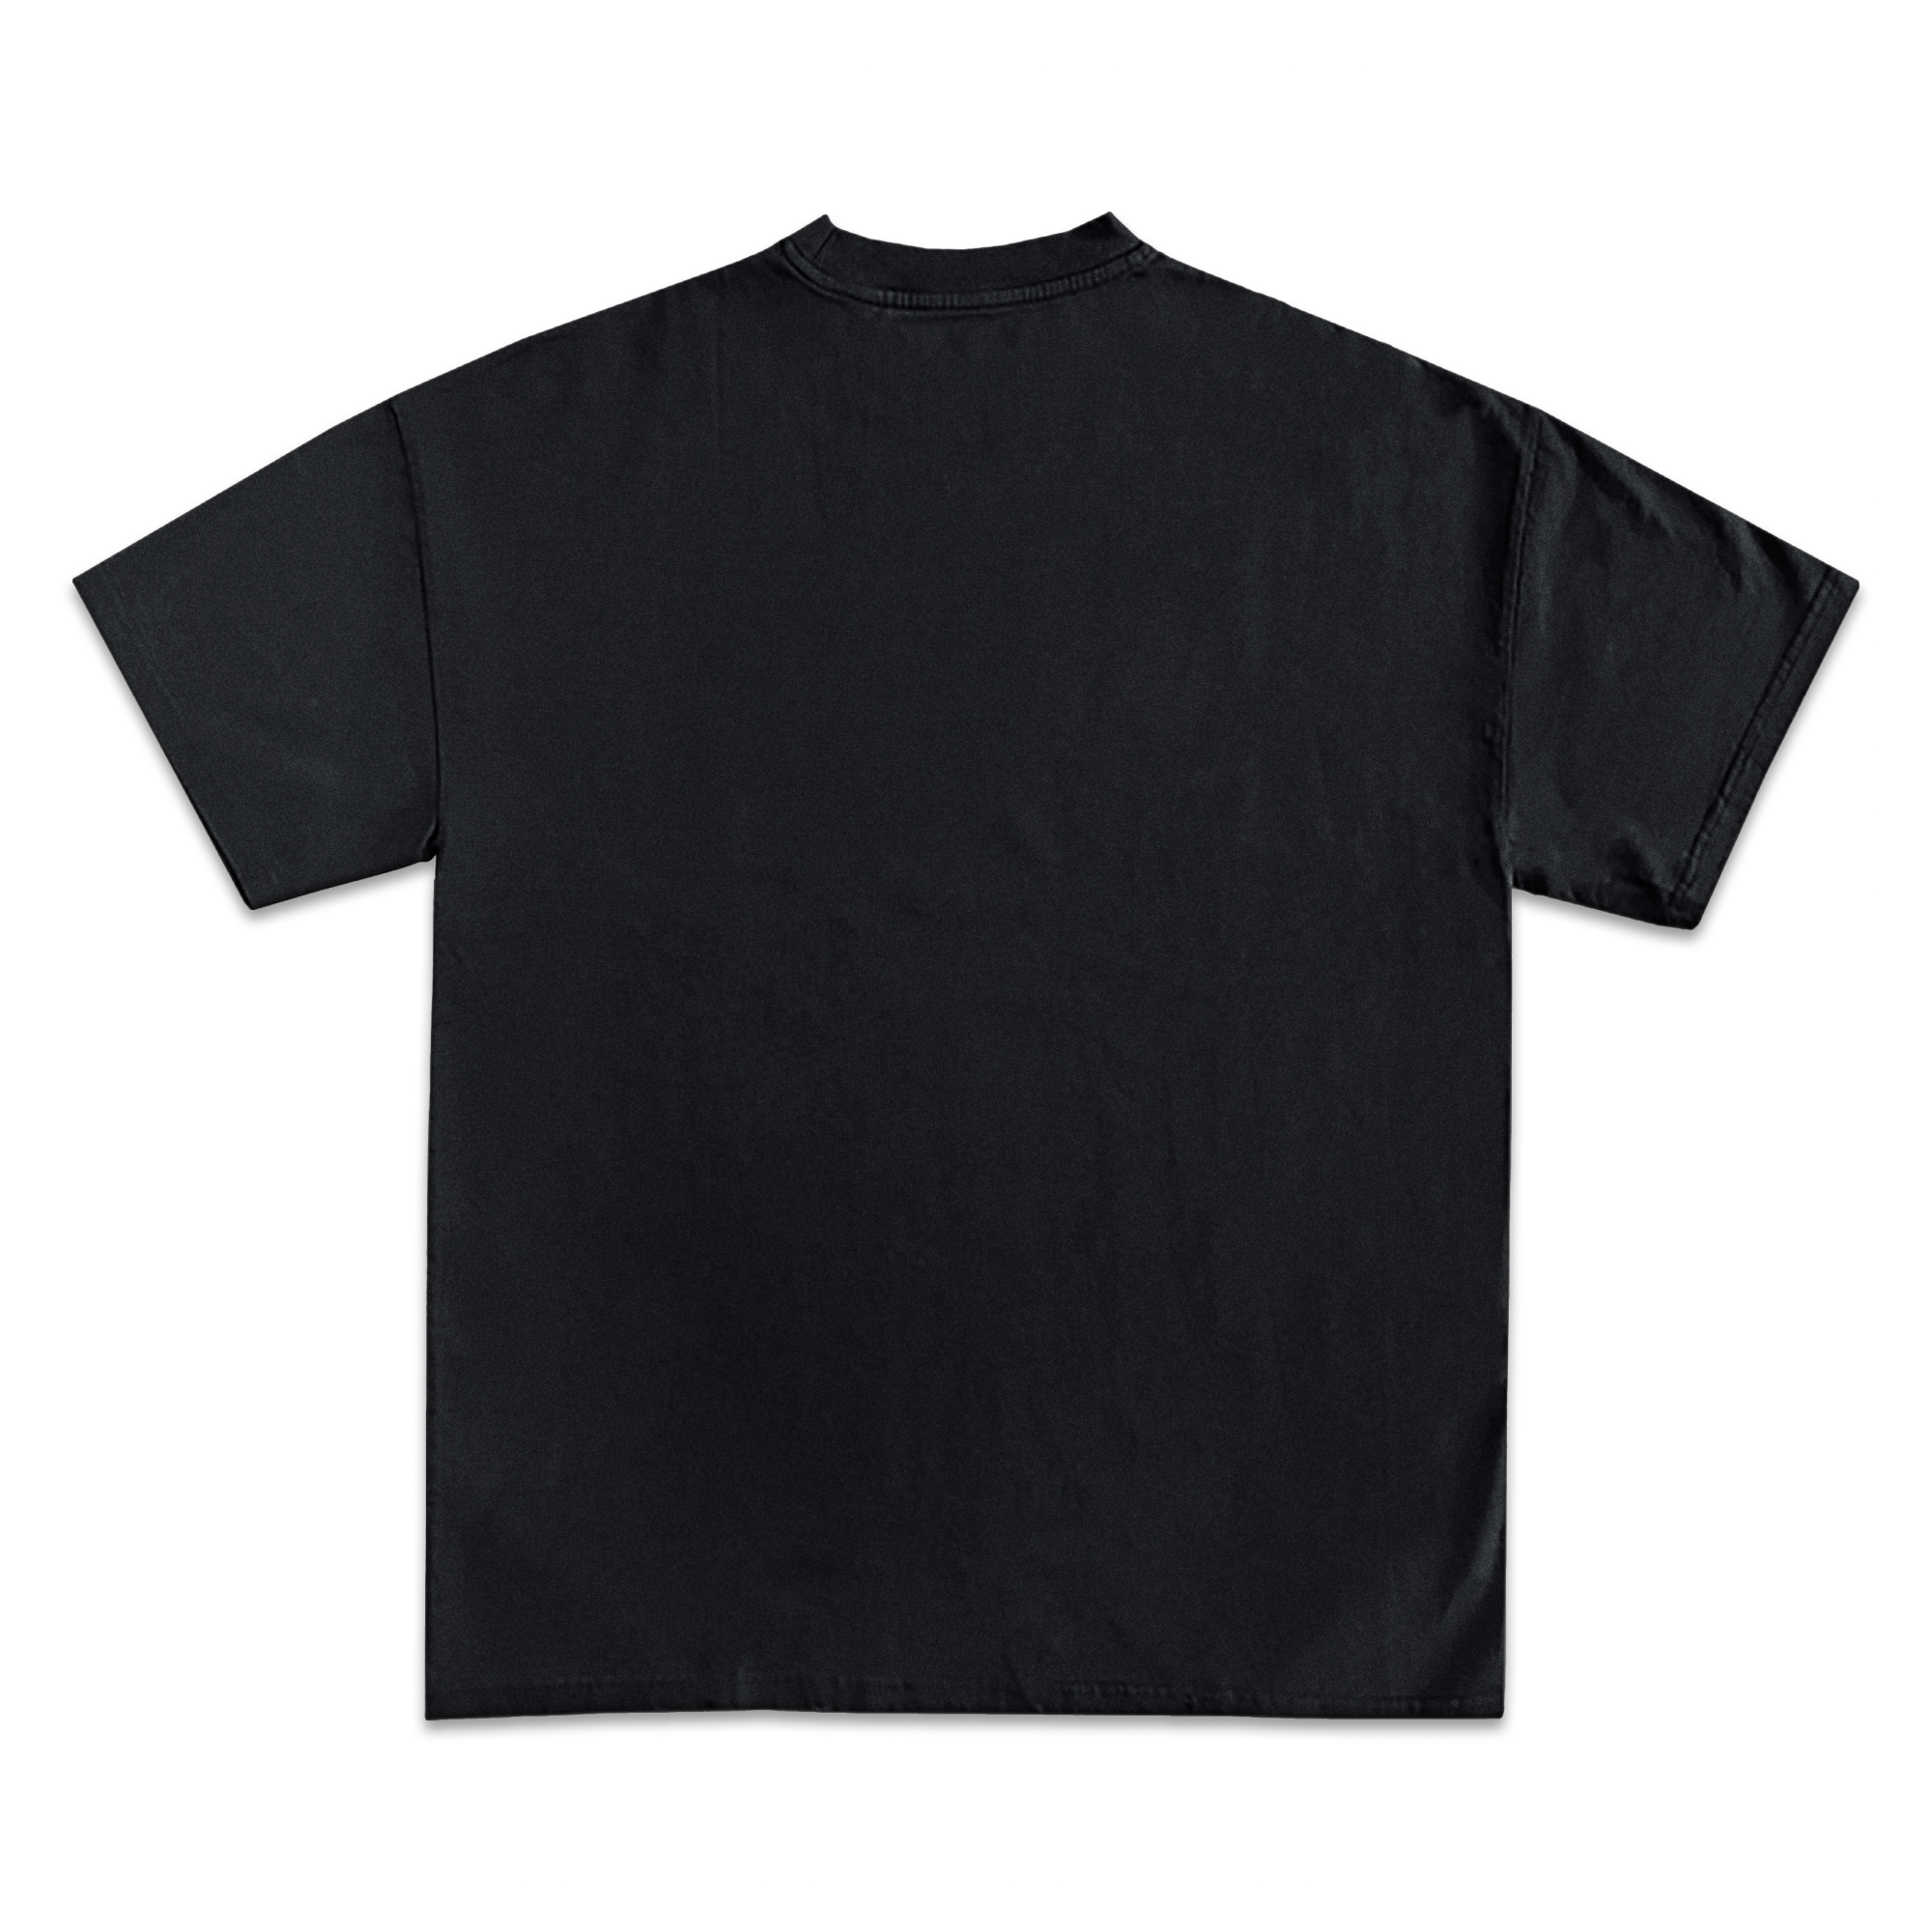 ASAP Rocky Icy Exclusive Graphic T-Shirt